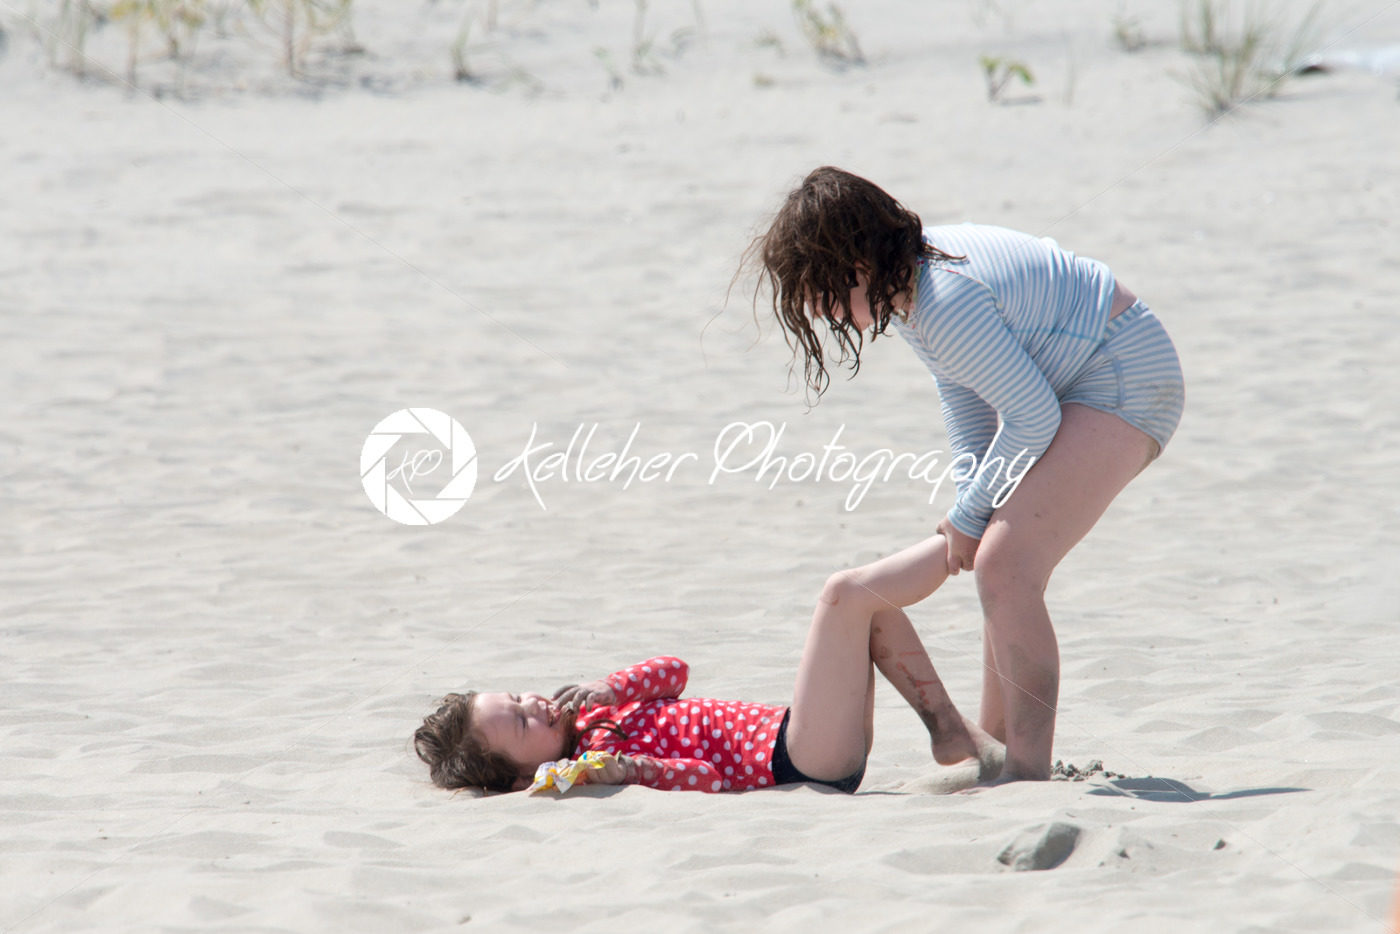 Sibling girls playing in the sand on summer beach - Kelleher Photography Store